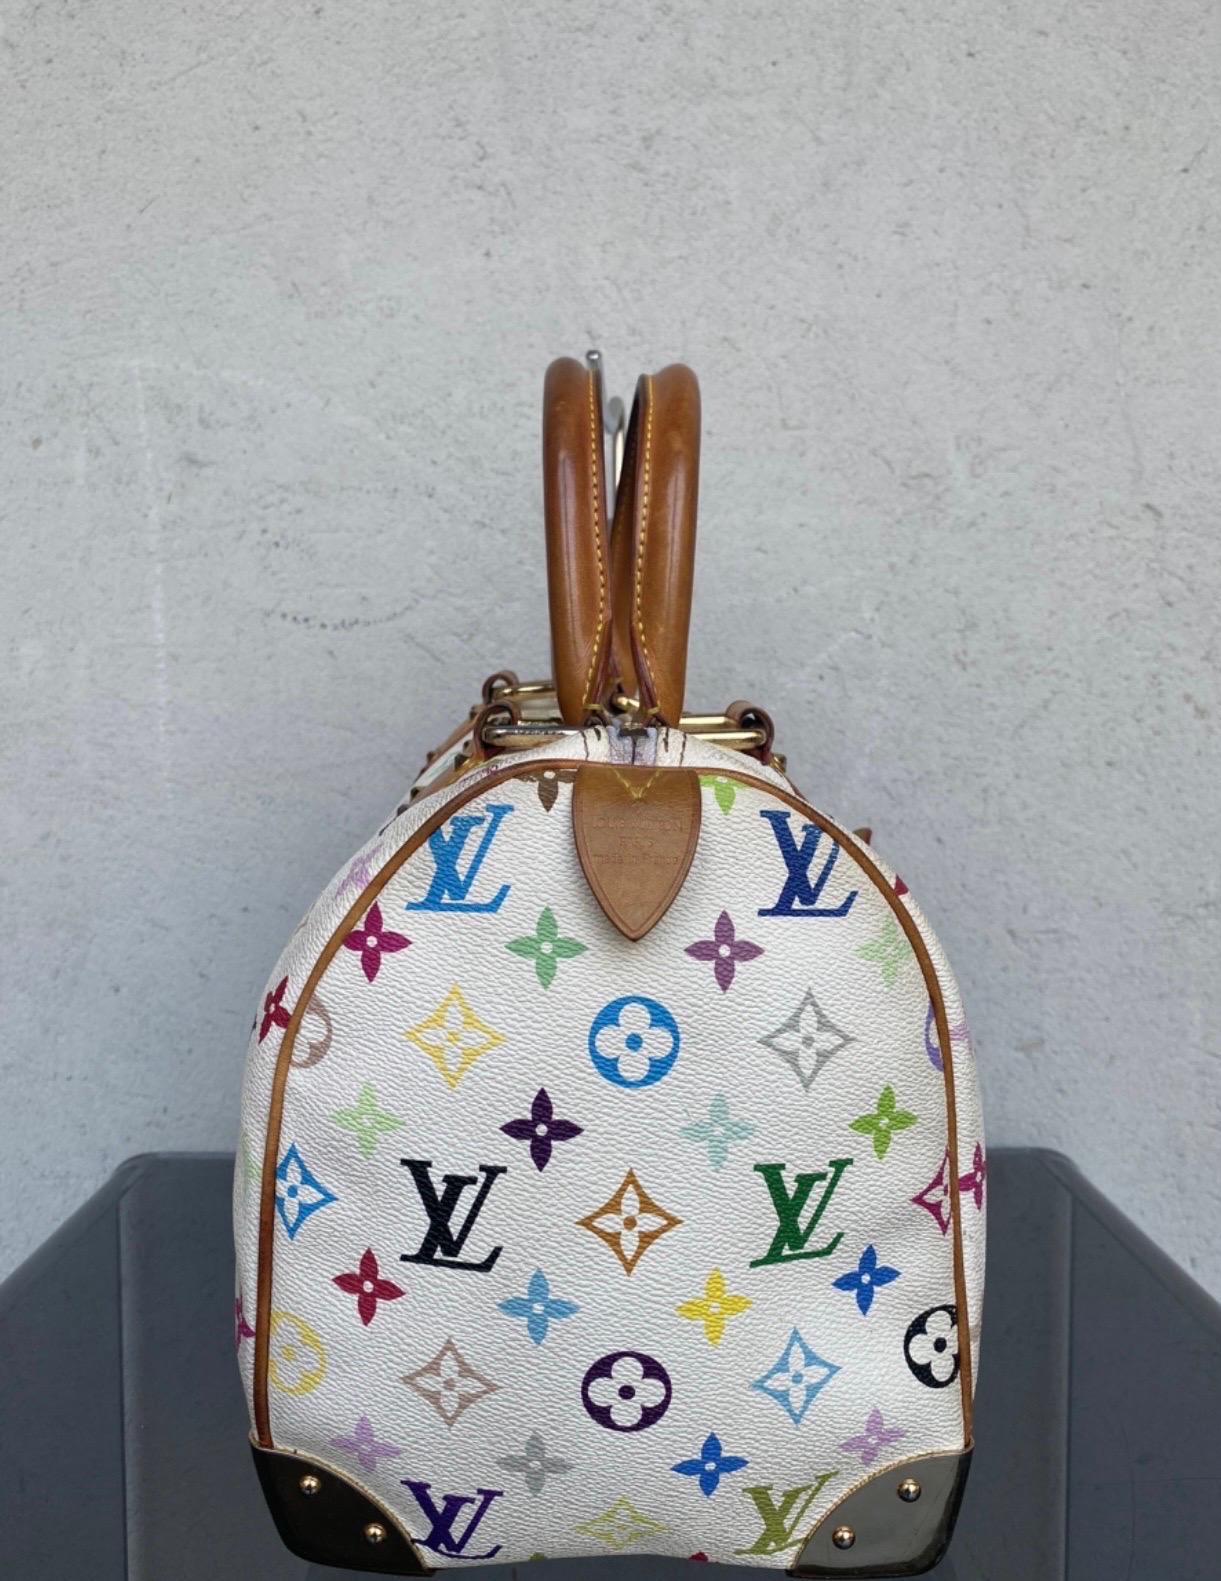 Louis Vuitton bag. 
Speedy 30 Murakami model. 
In white leather with multicolor logo.
measurements:
height 21 cm
length 30 cm
depth 17 cm
good general condition but shows more signs. as seen in photos, it features a pink halo around the front pocket